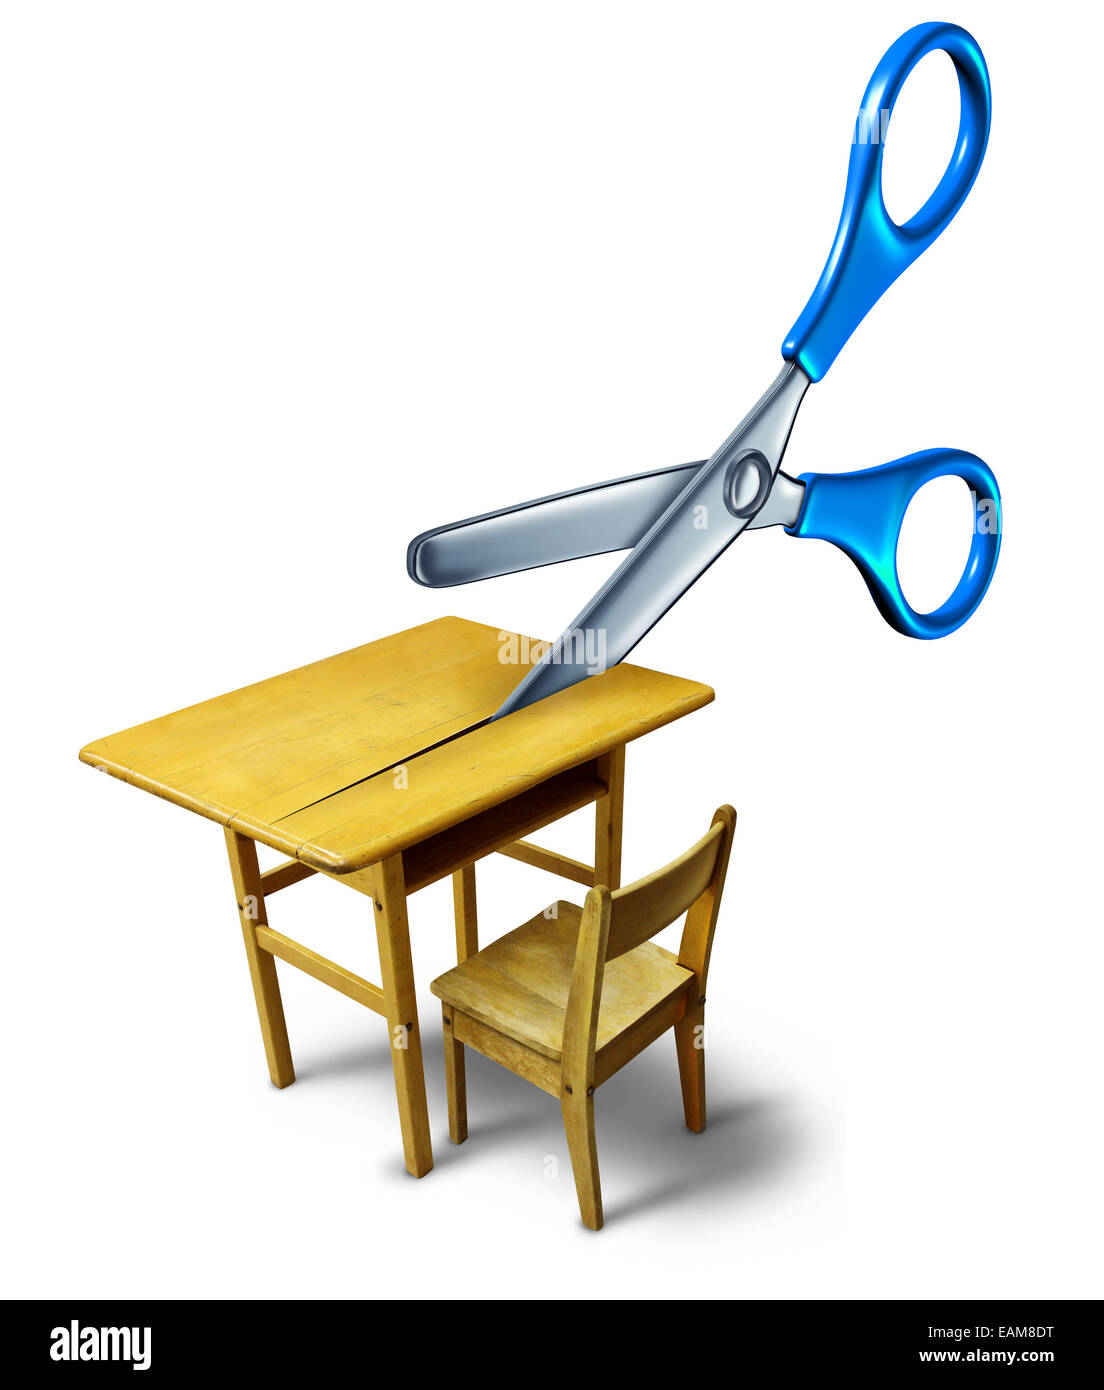 School budget cuts crisis concept and education cutbacks symbol as an old class desk being cut by scissors as a metaphor for bel Stock Photo